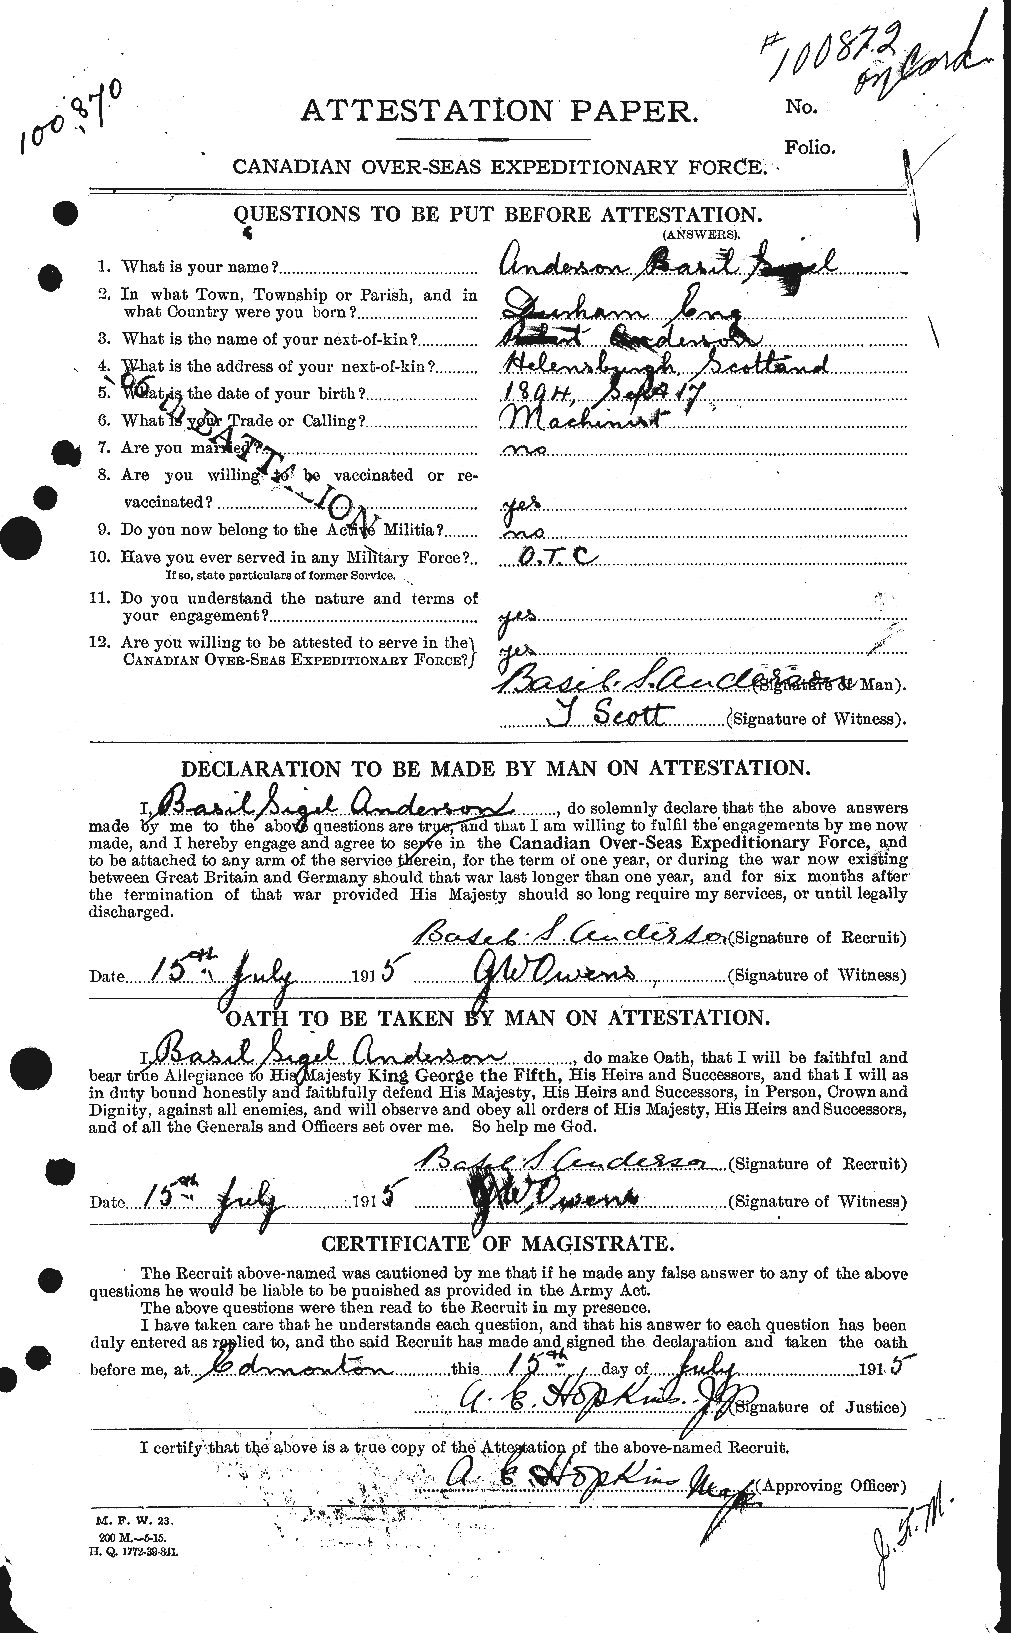 Personnel Records of the First World War - CEF 209324a